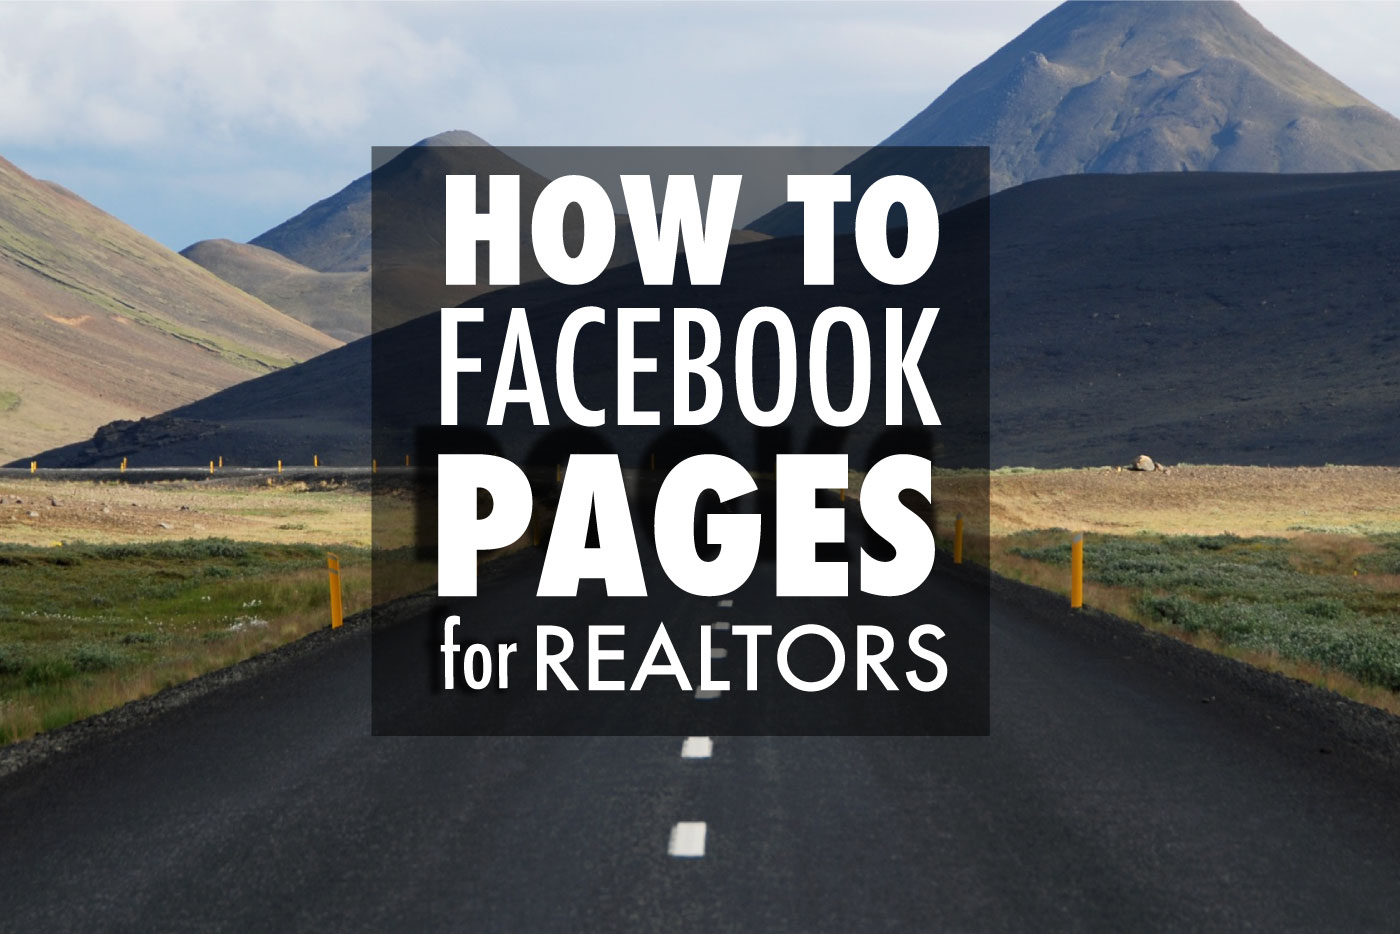 HOW TO SETUP A FACEBOOK PAGE FOR REALTORS